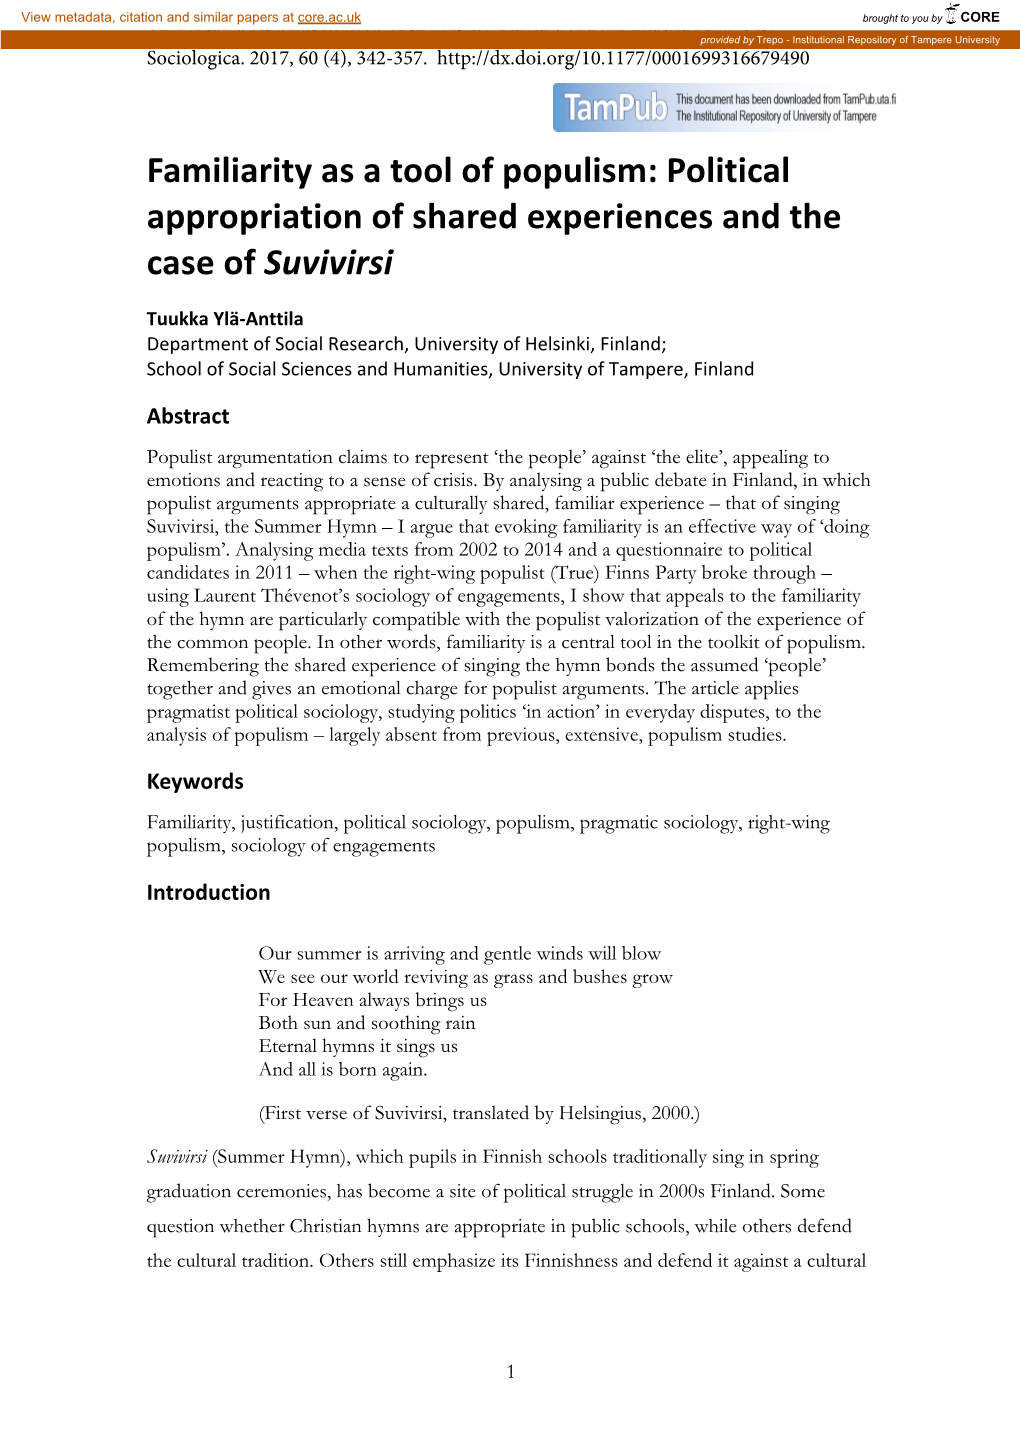 Political Appropriation of Shared Experiences and the Case of Suvivirsi